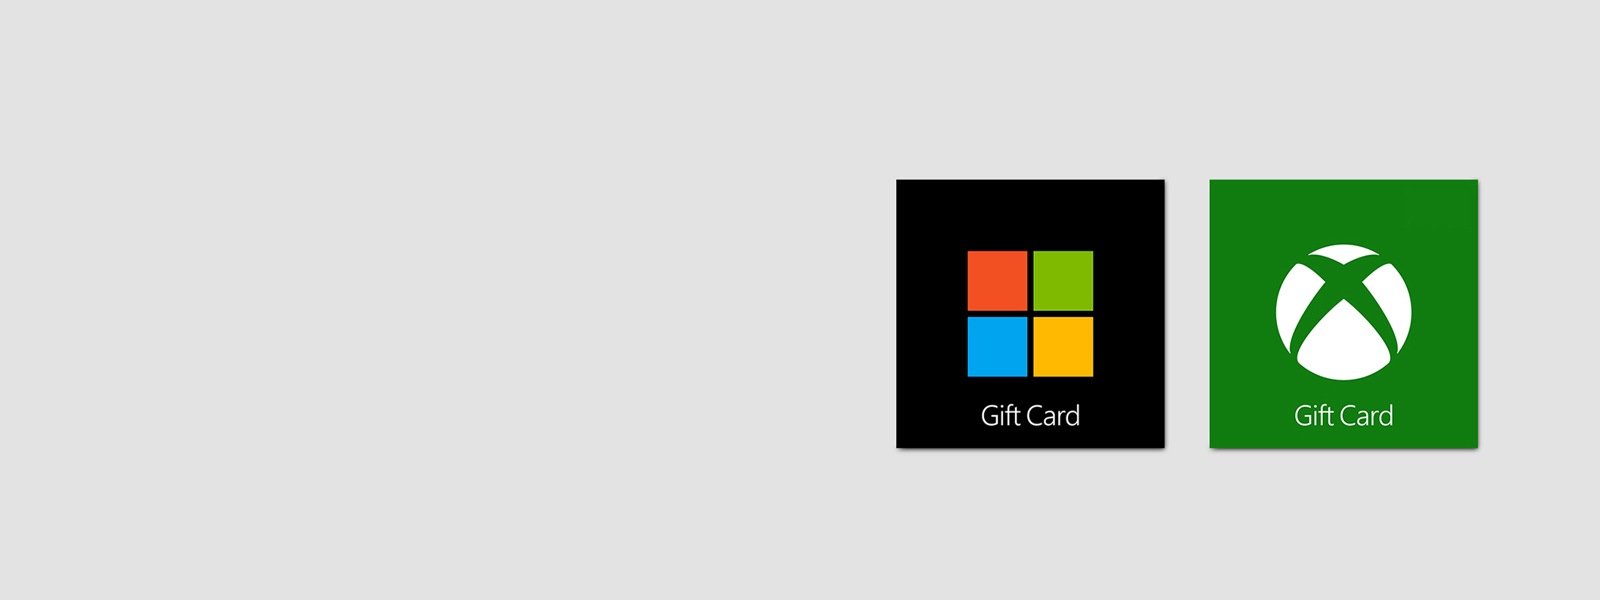 Microsoft and Xbox Gift Cards - Digital Gift Cards - Microsoft Store